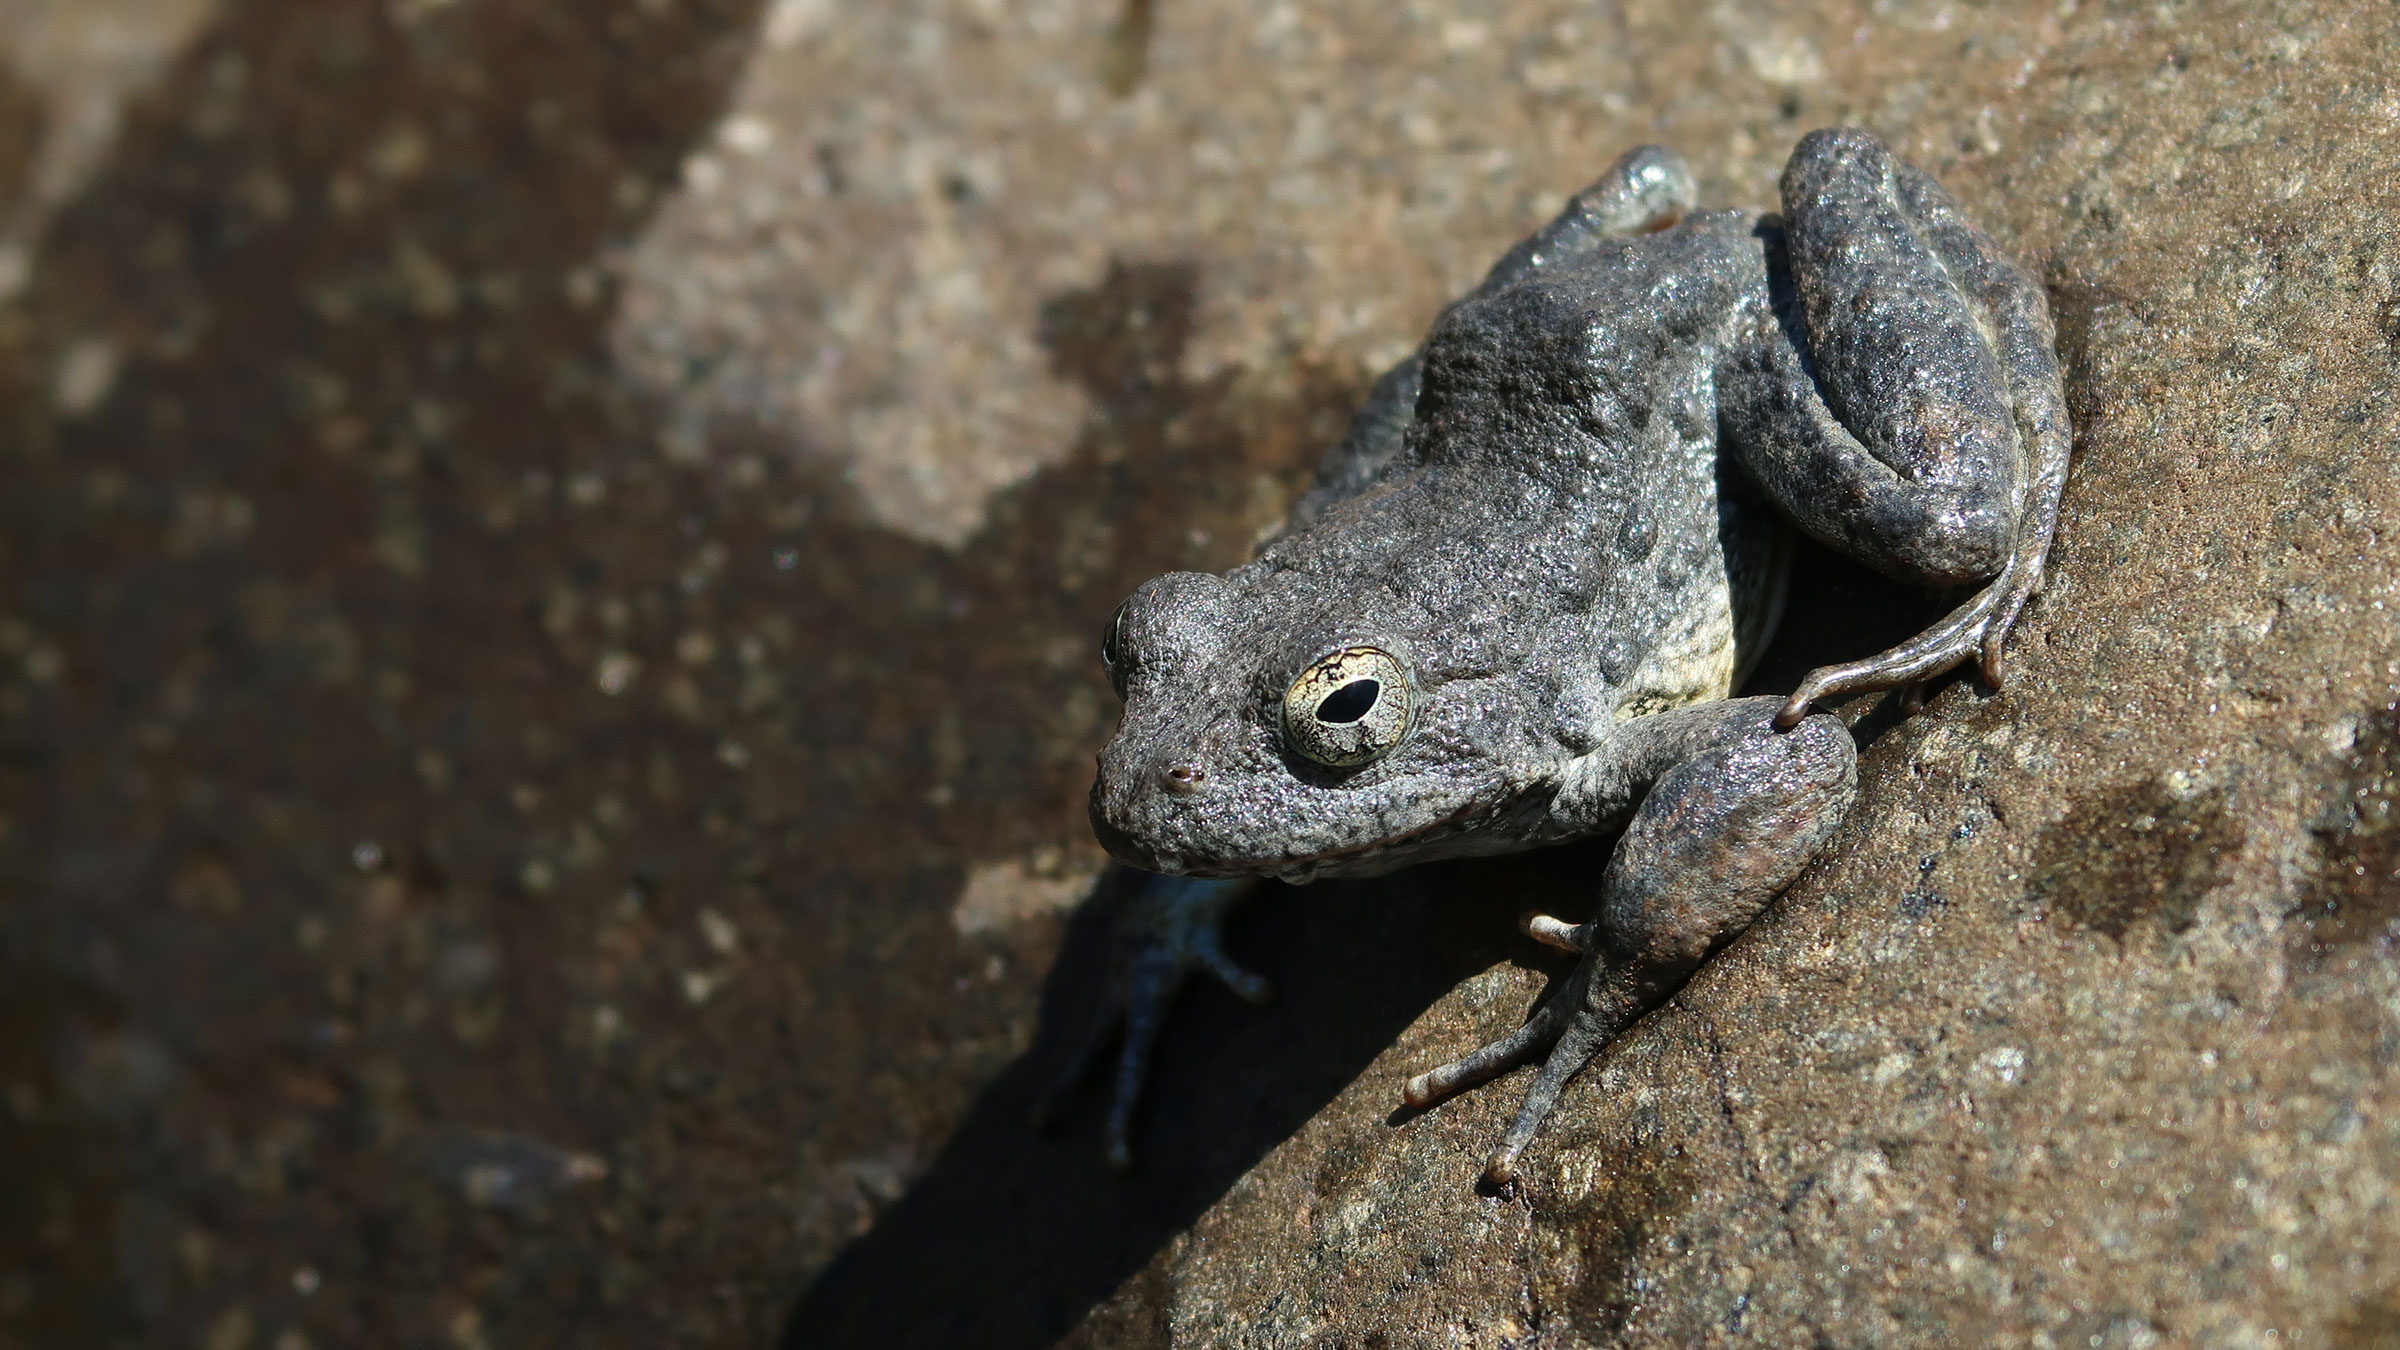 A small frog perches on a large rock